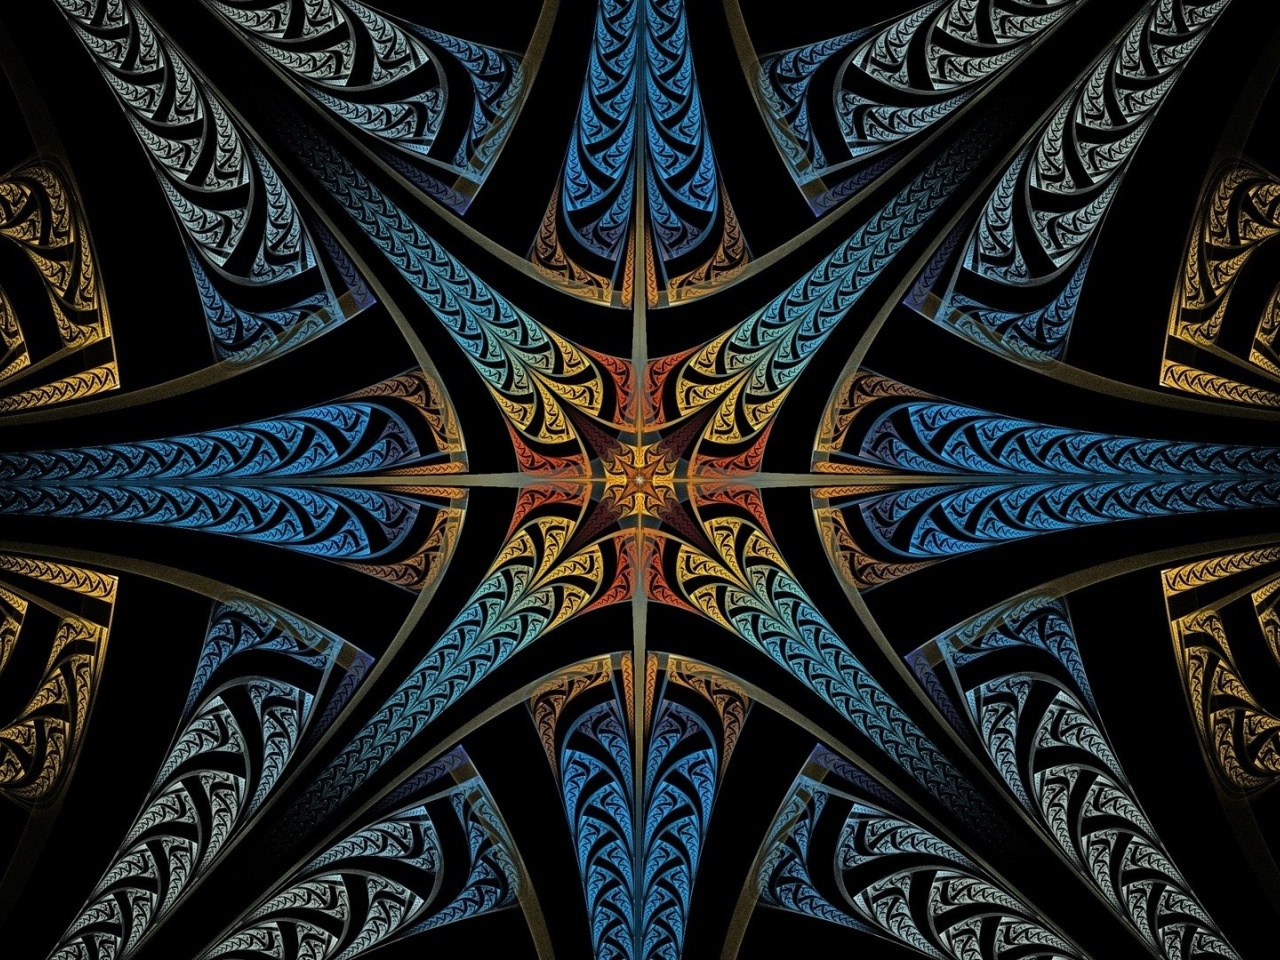 Abstract Starburs Fractal